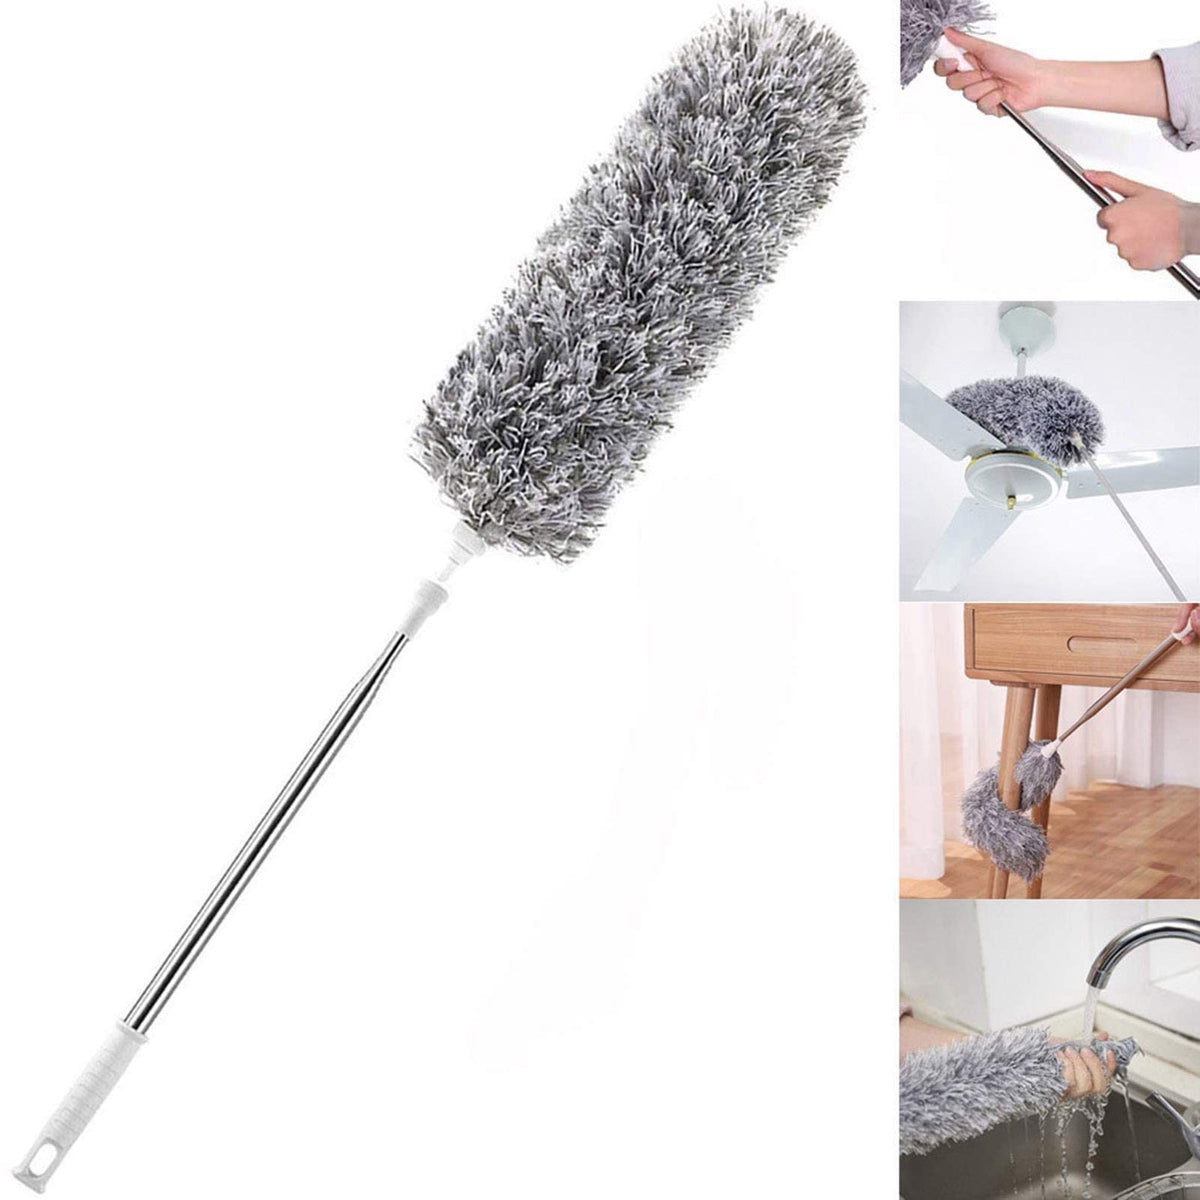 Feather Duster, Improved Long Pole Duster (30 to100 inches), Microfiber Bendable Head & Scratch-Resistant Hat for Clean home, Ceiling Fan, High Ceiling, Blinds, Furniture & Car